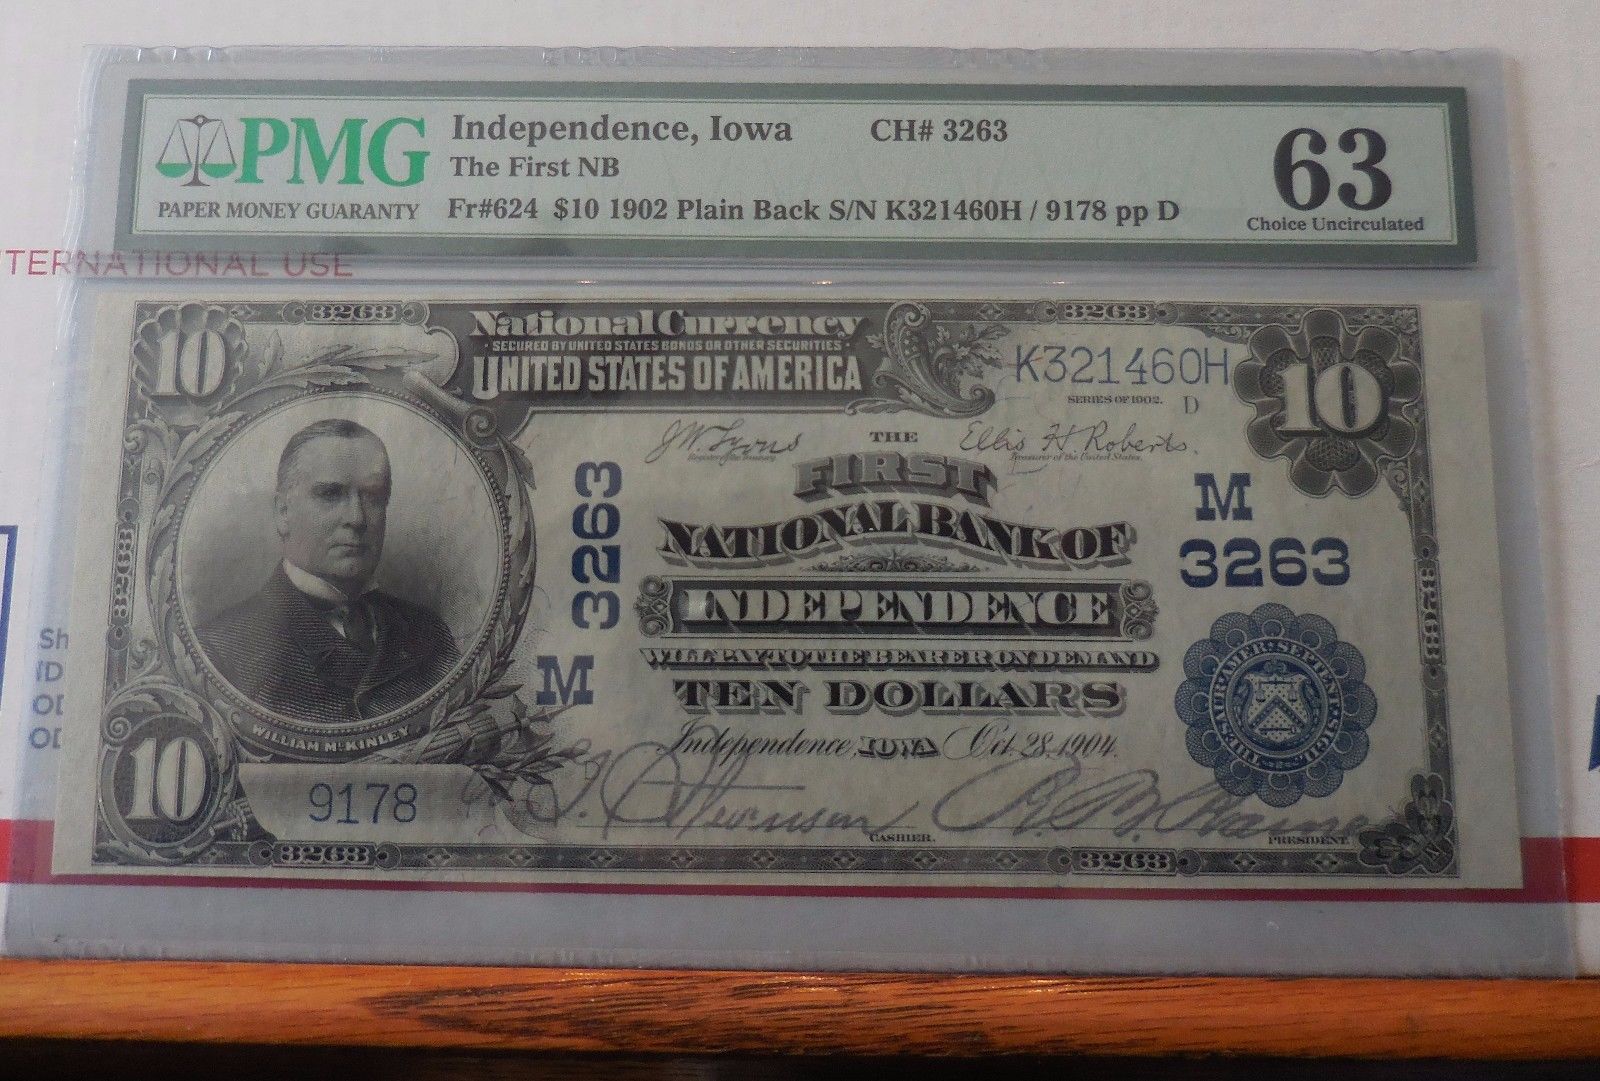 1902 $10 PLAIN BACK NATIONAL CURRENCY - FIRST NATL BANK INDEPENDENCE IOWA PMG 63